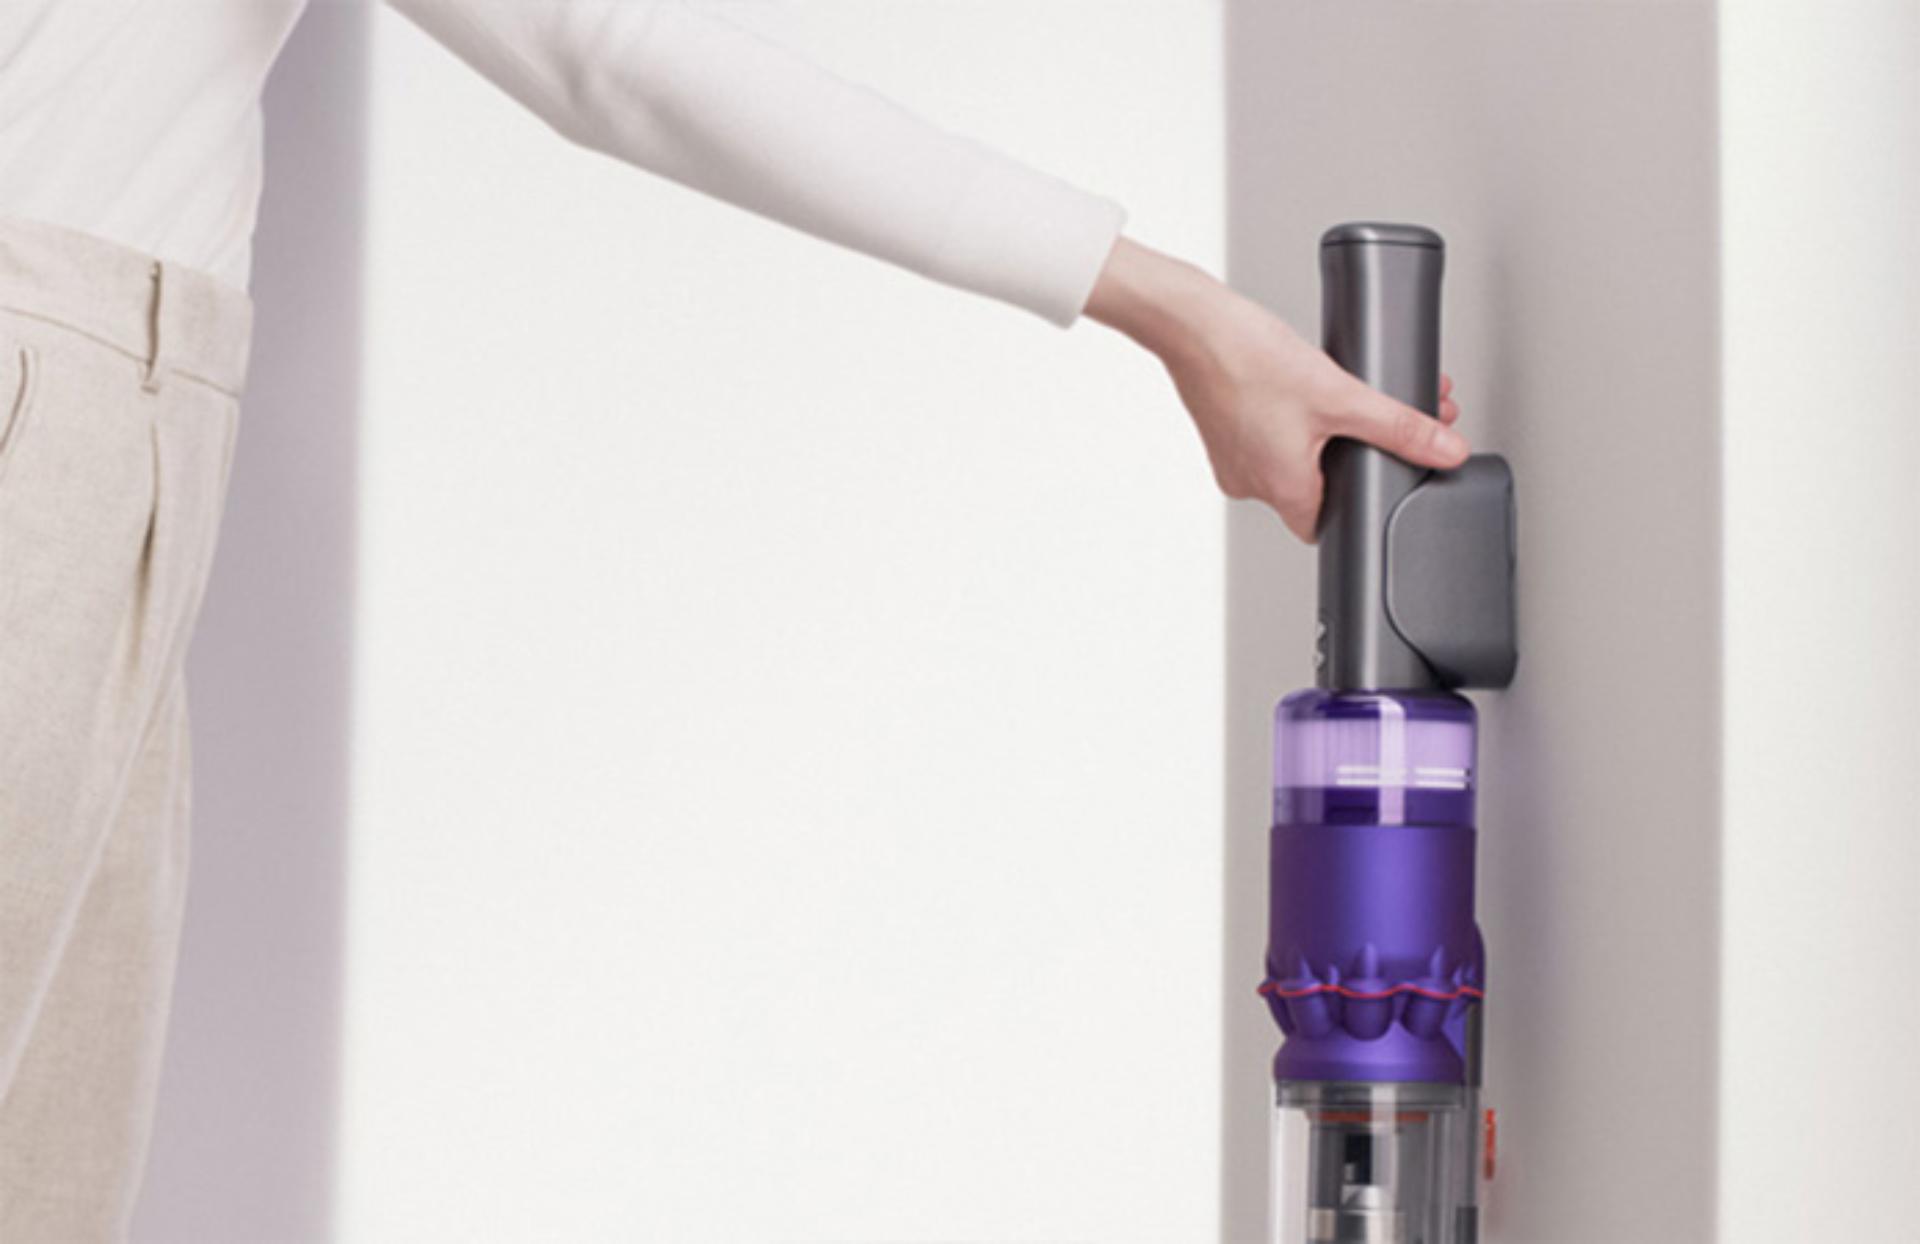 Dyson Omni-glide™ vacuum being placed into wall dock.